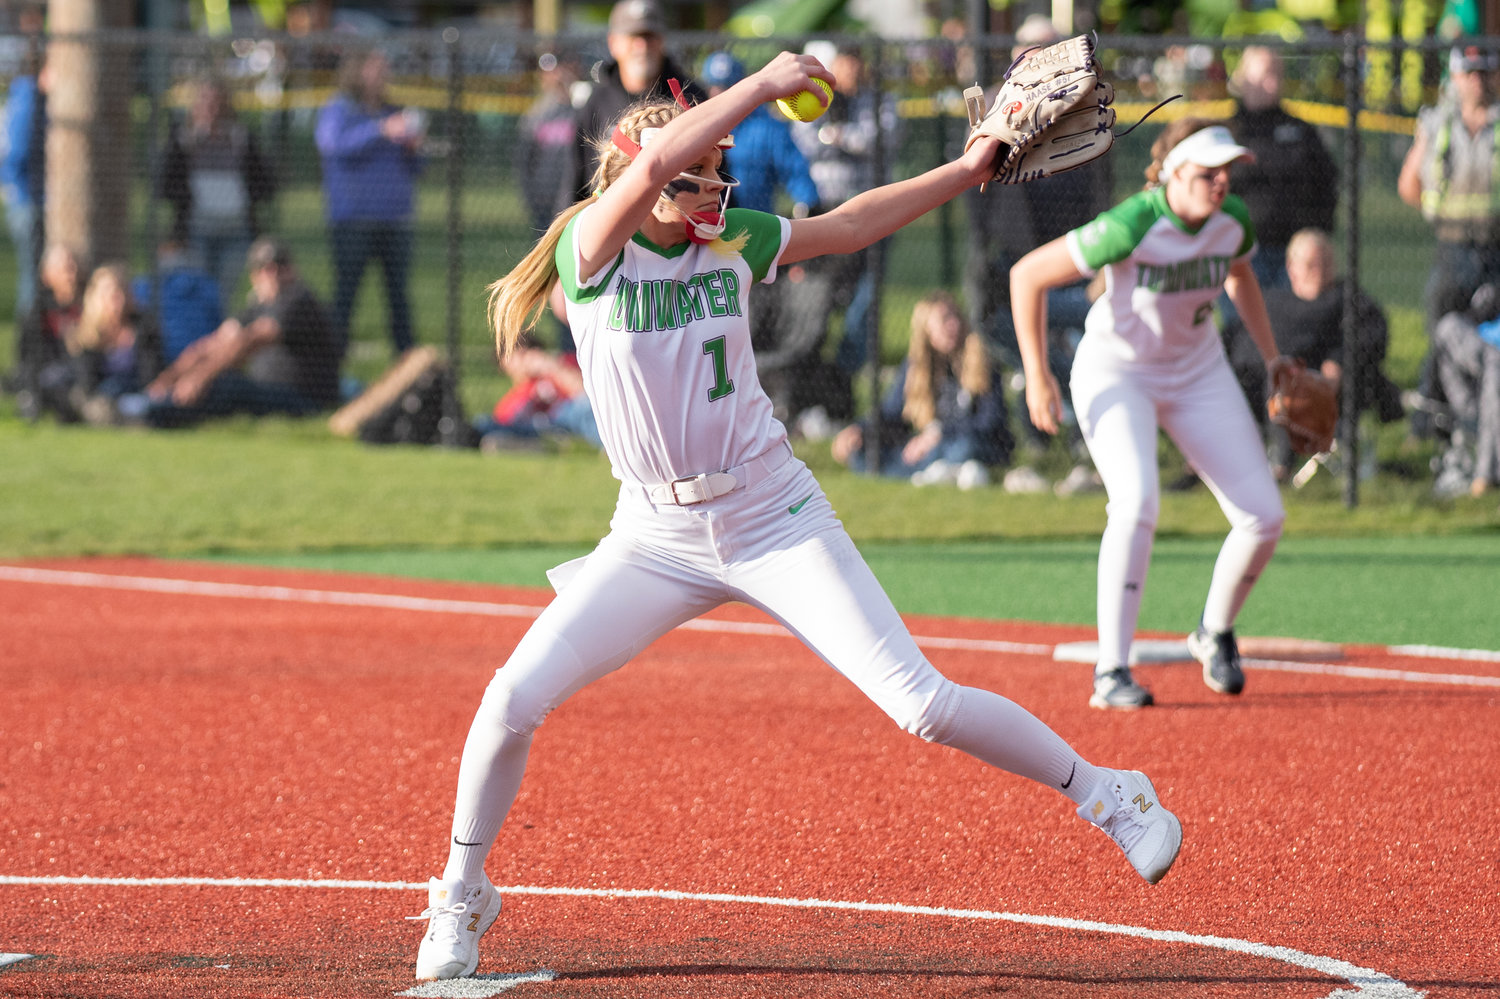 Tumwater's Ella Ferguson winds up to deliver a pitch against W.F. West in the 2A District 4 championship game at Rec Park May 20.